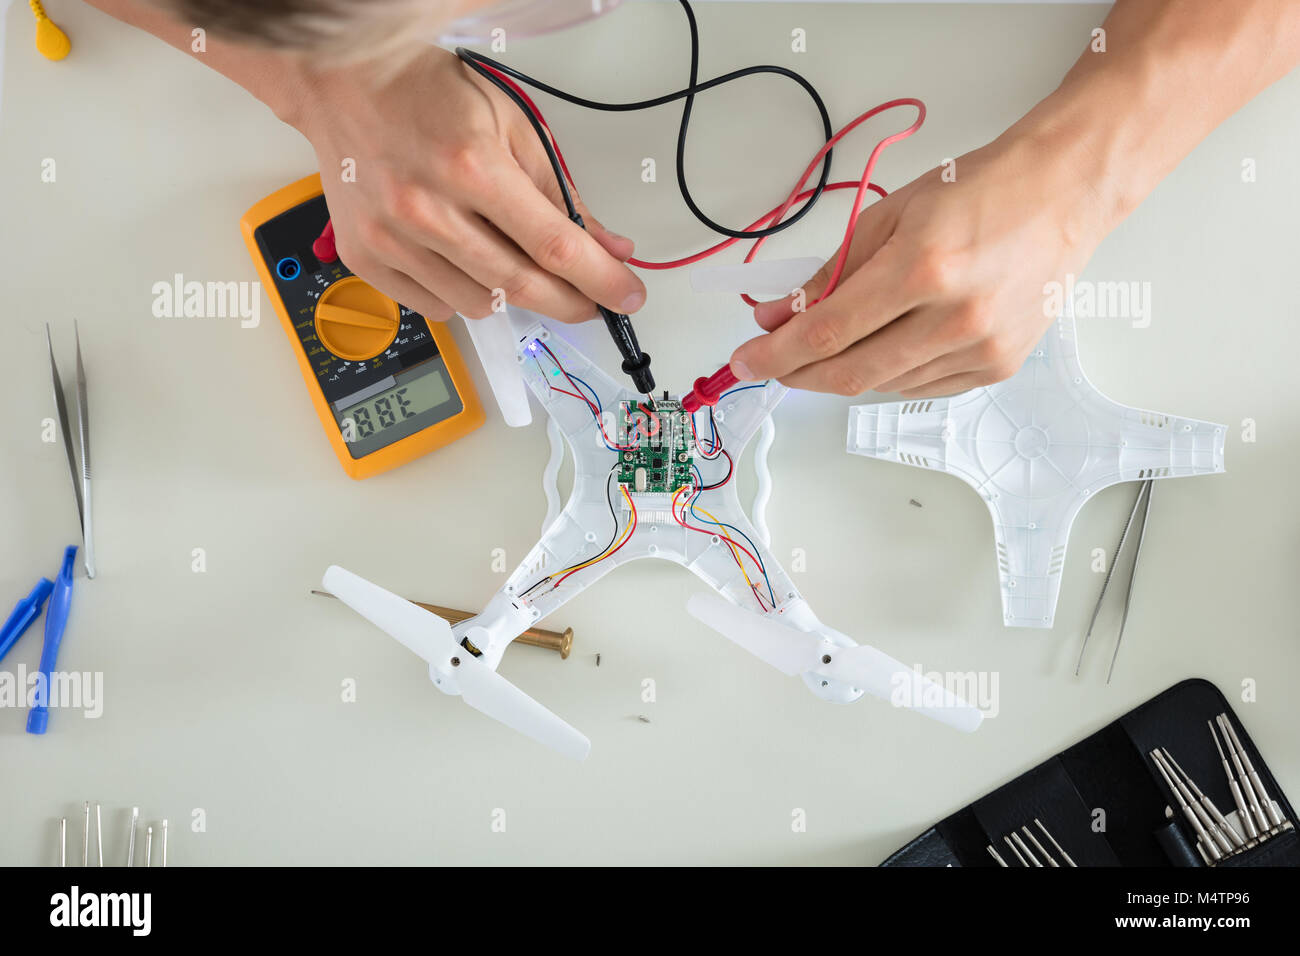 Close-up Of A Man Testing Electric Current Of Disassembled Drone Using Multimeter Tool Stock Photo